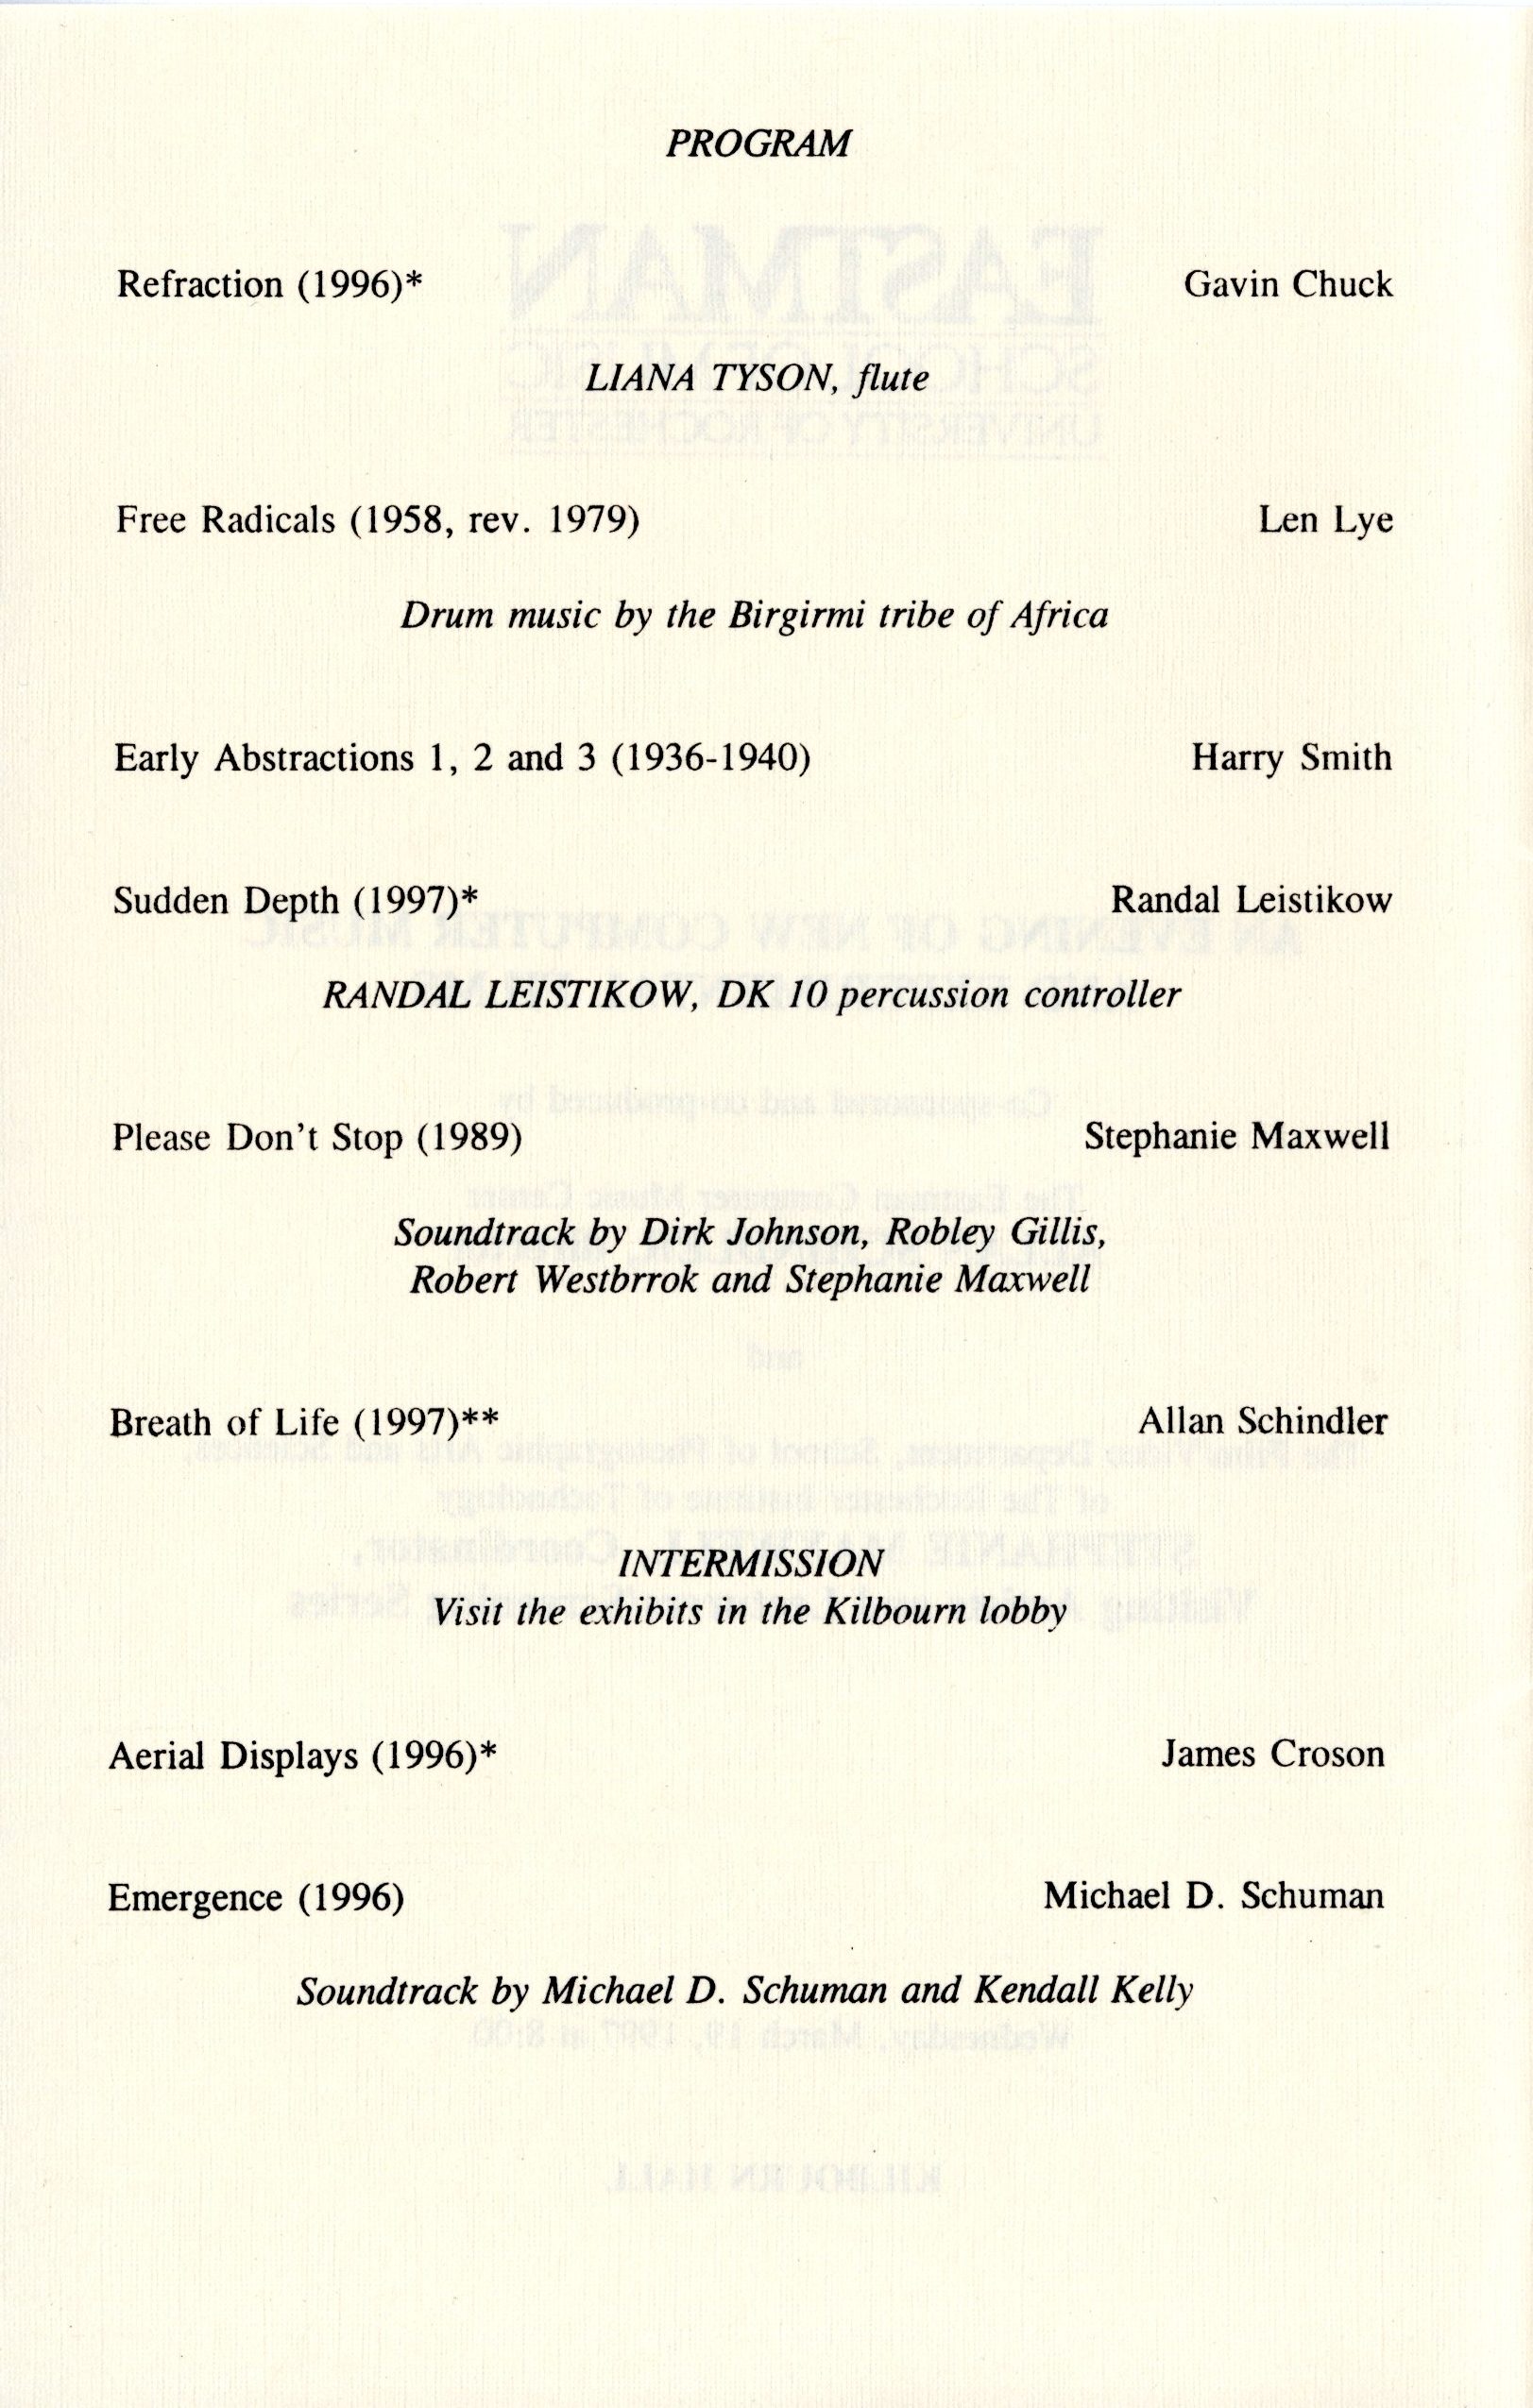 Evening of Computer Music and Films, concert program, page 02